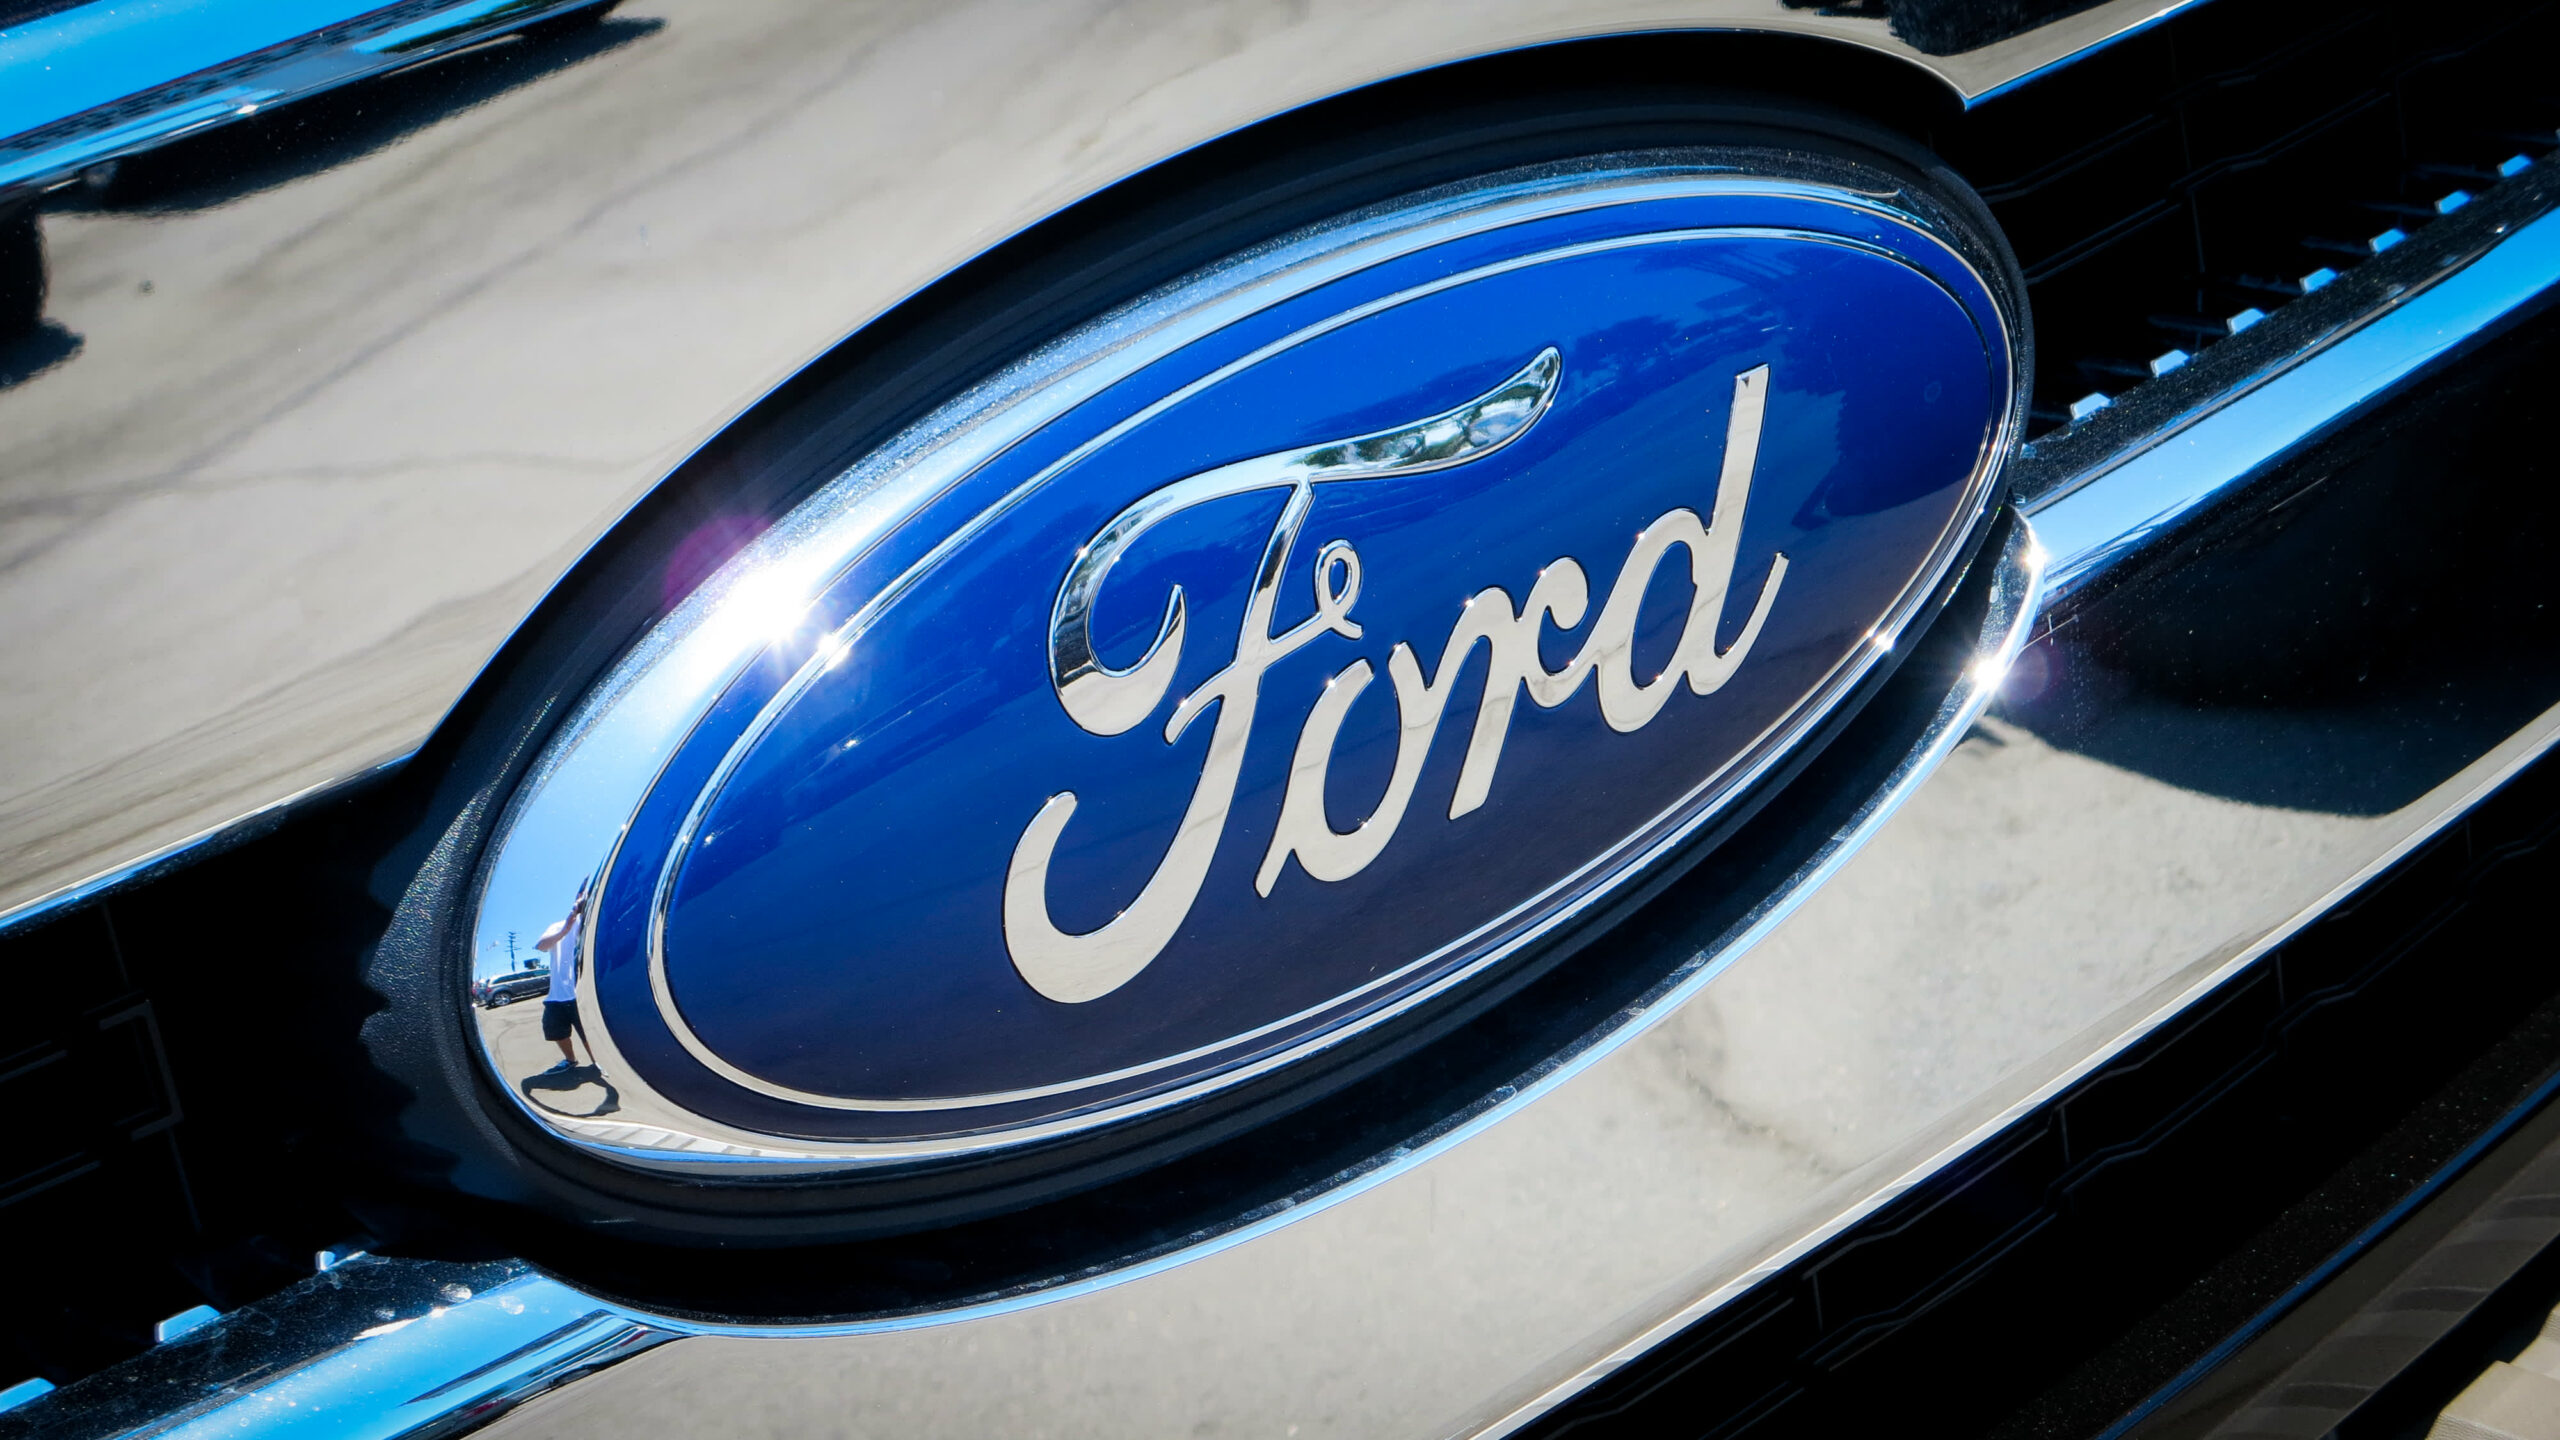 Ford CEO expects chip scarcity impression to backside in second quarter